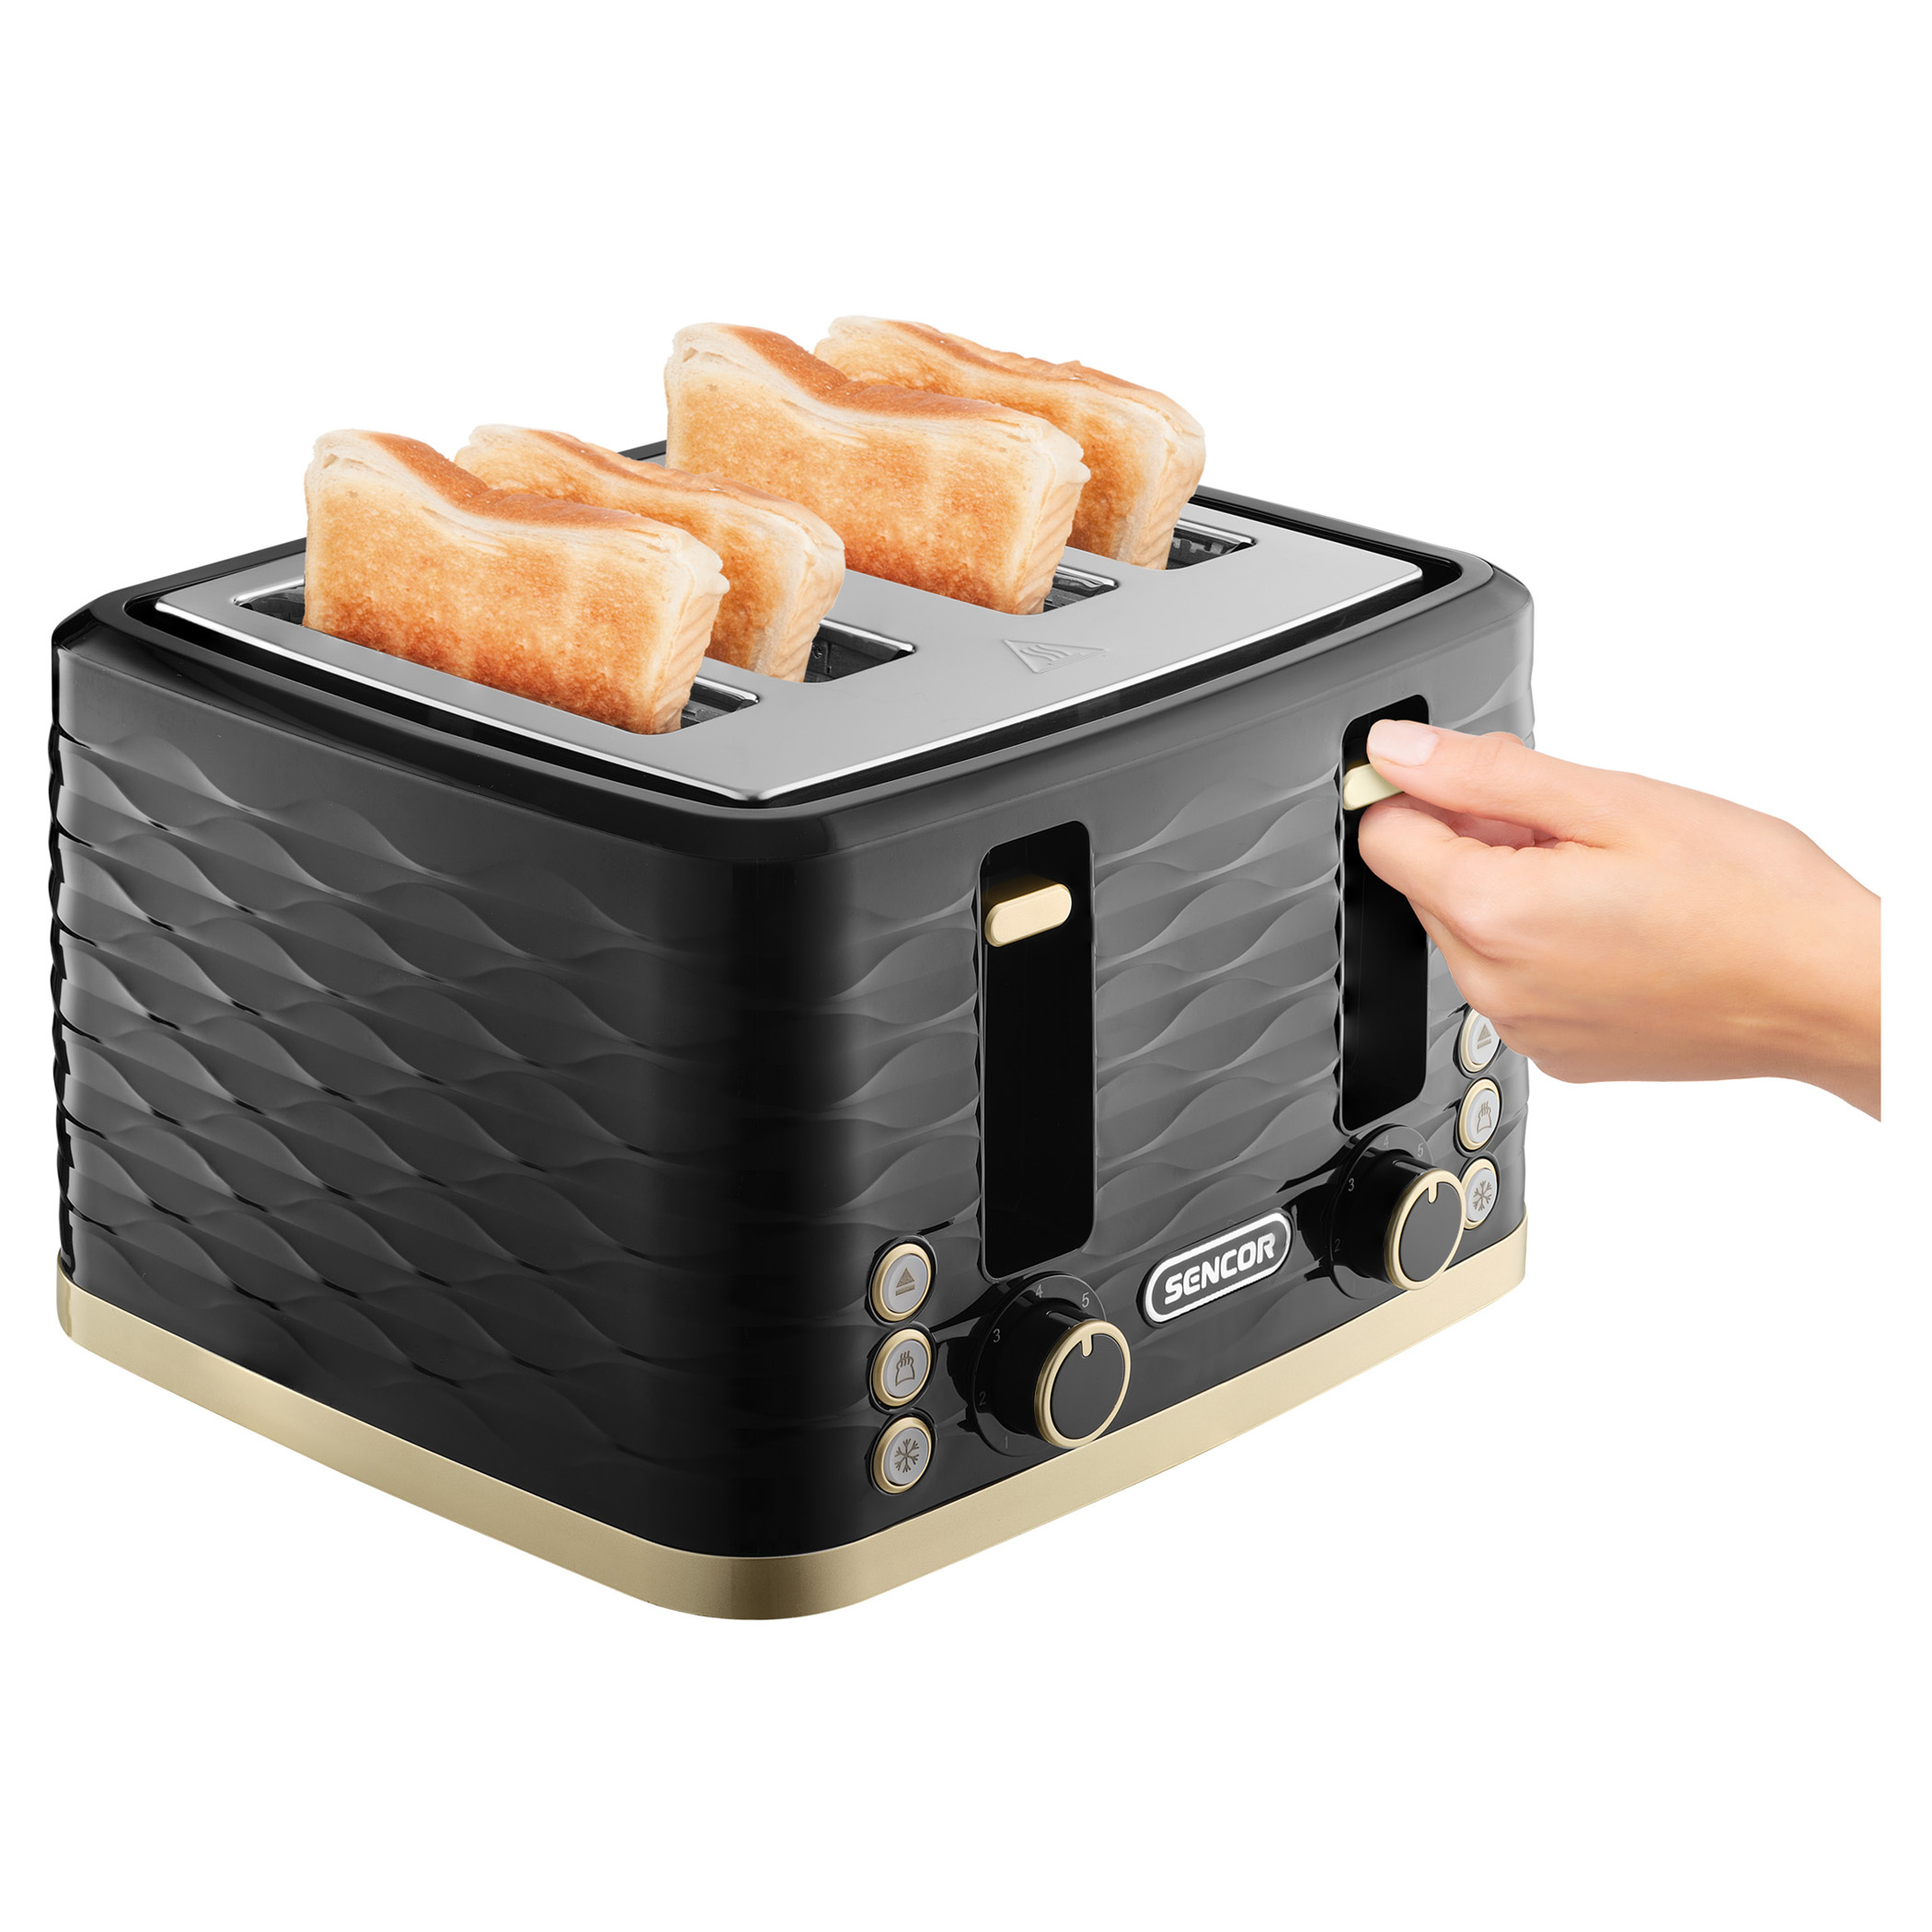 Electric Toaster, STS 7551BK